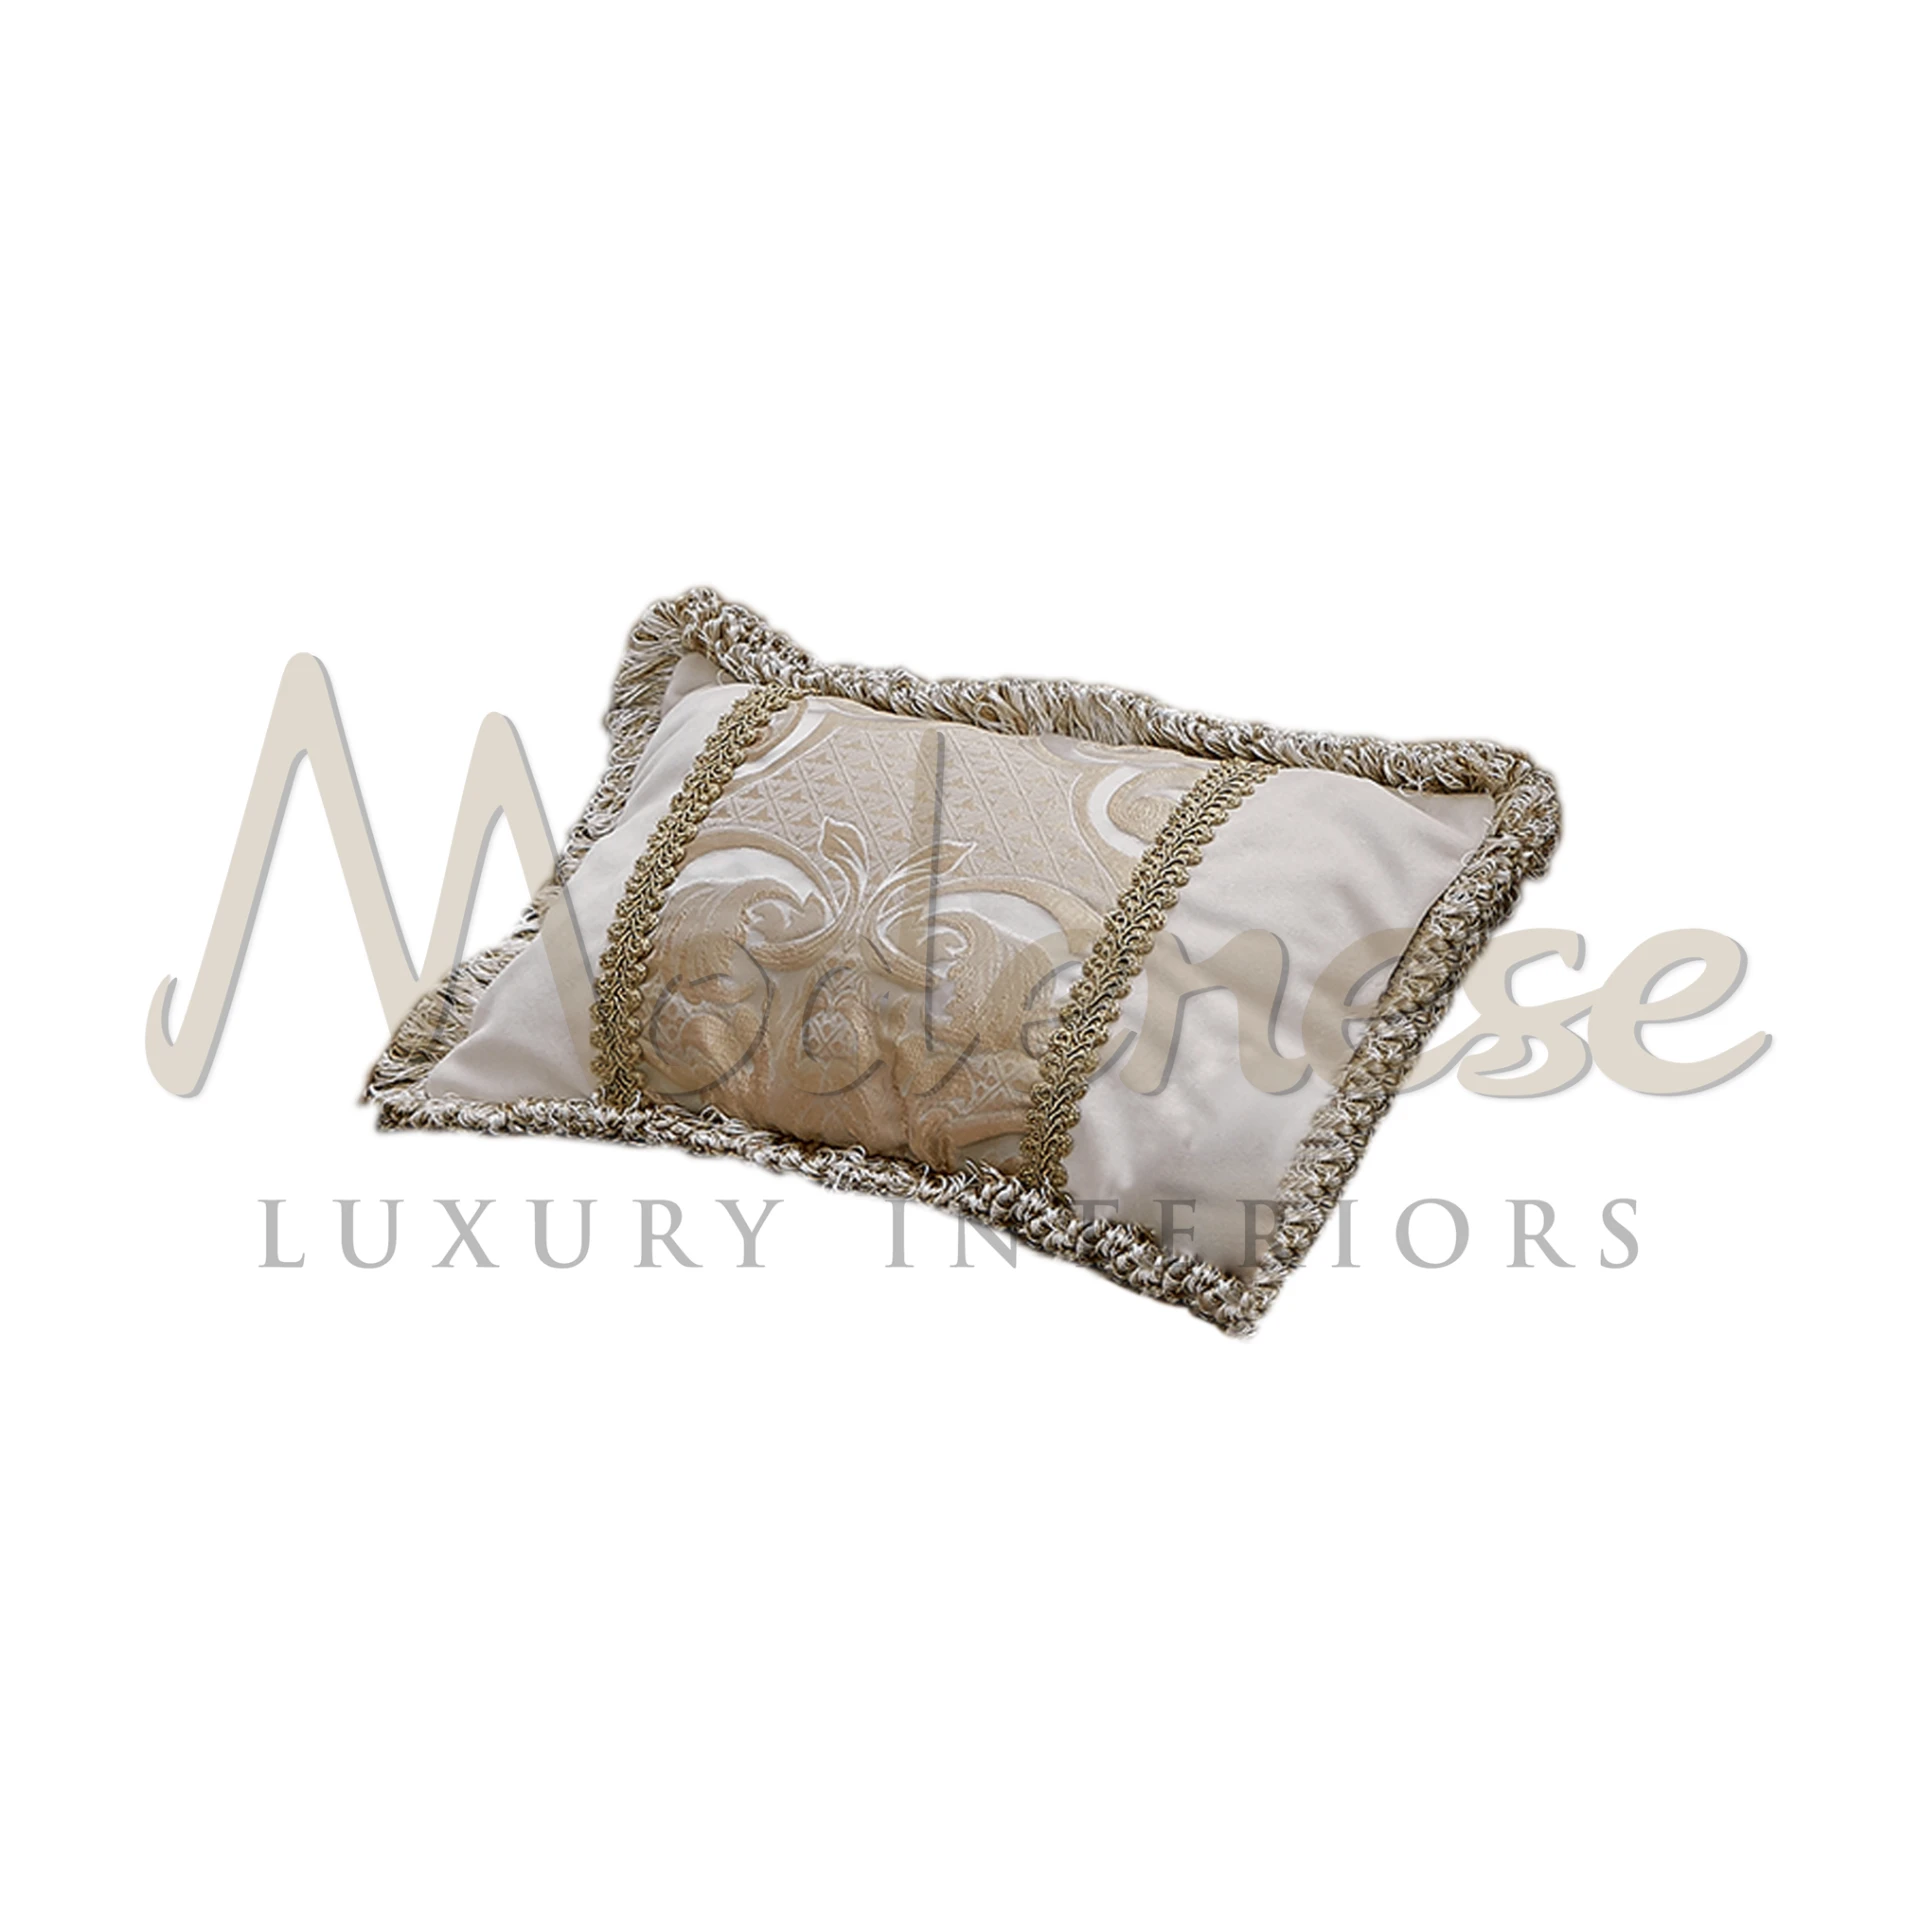 Luxury meets comfort in the Comfort Pillow, designed with high-quality textiles and attention to detail for serene rest.